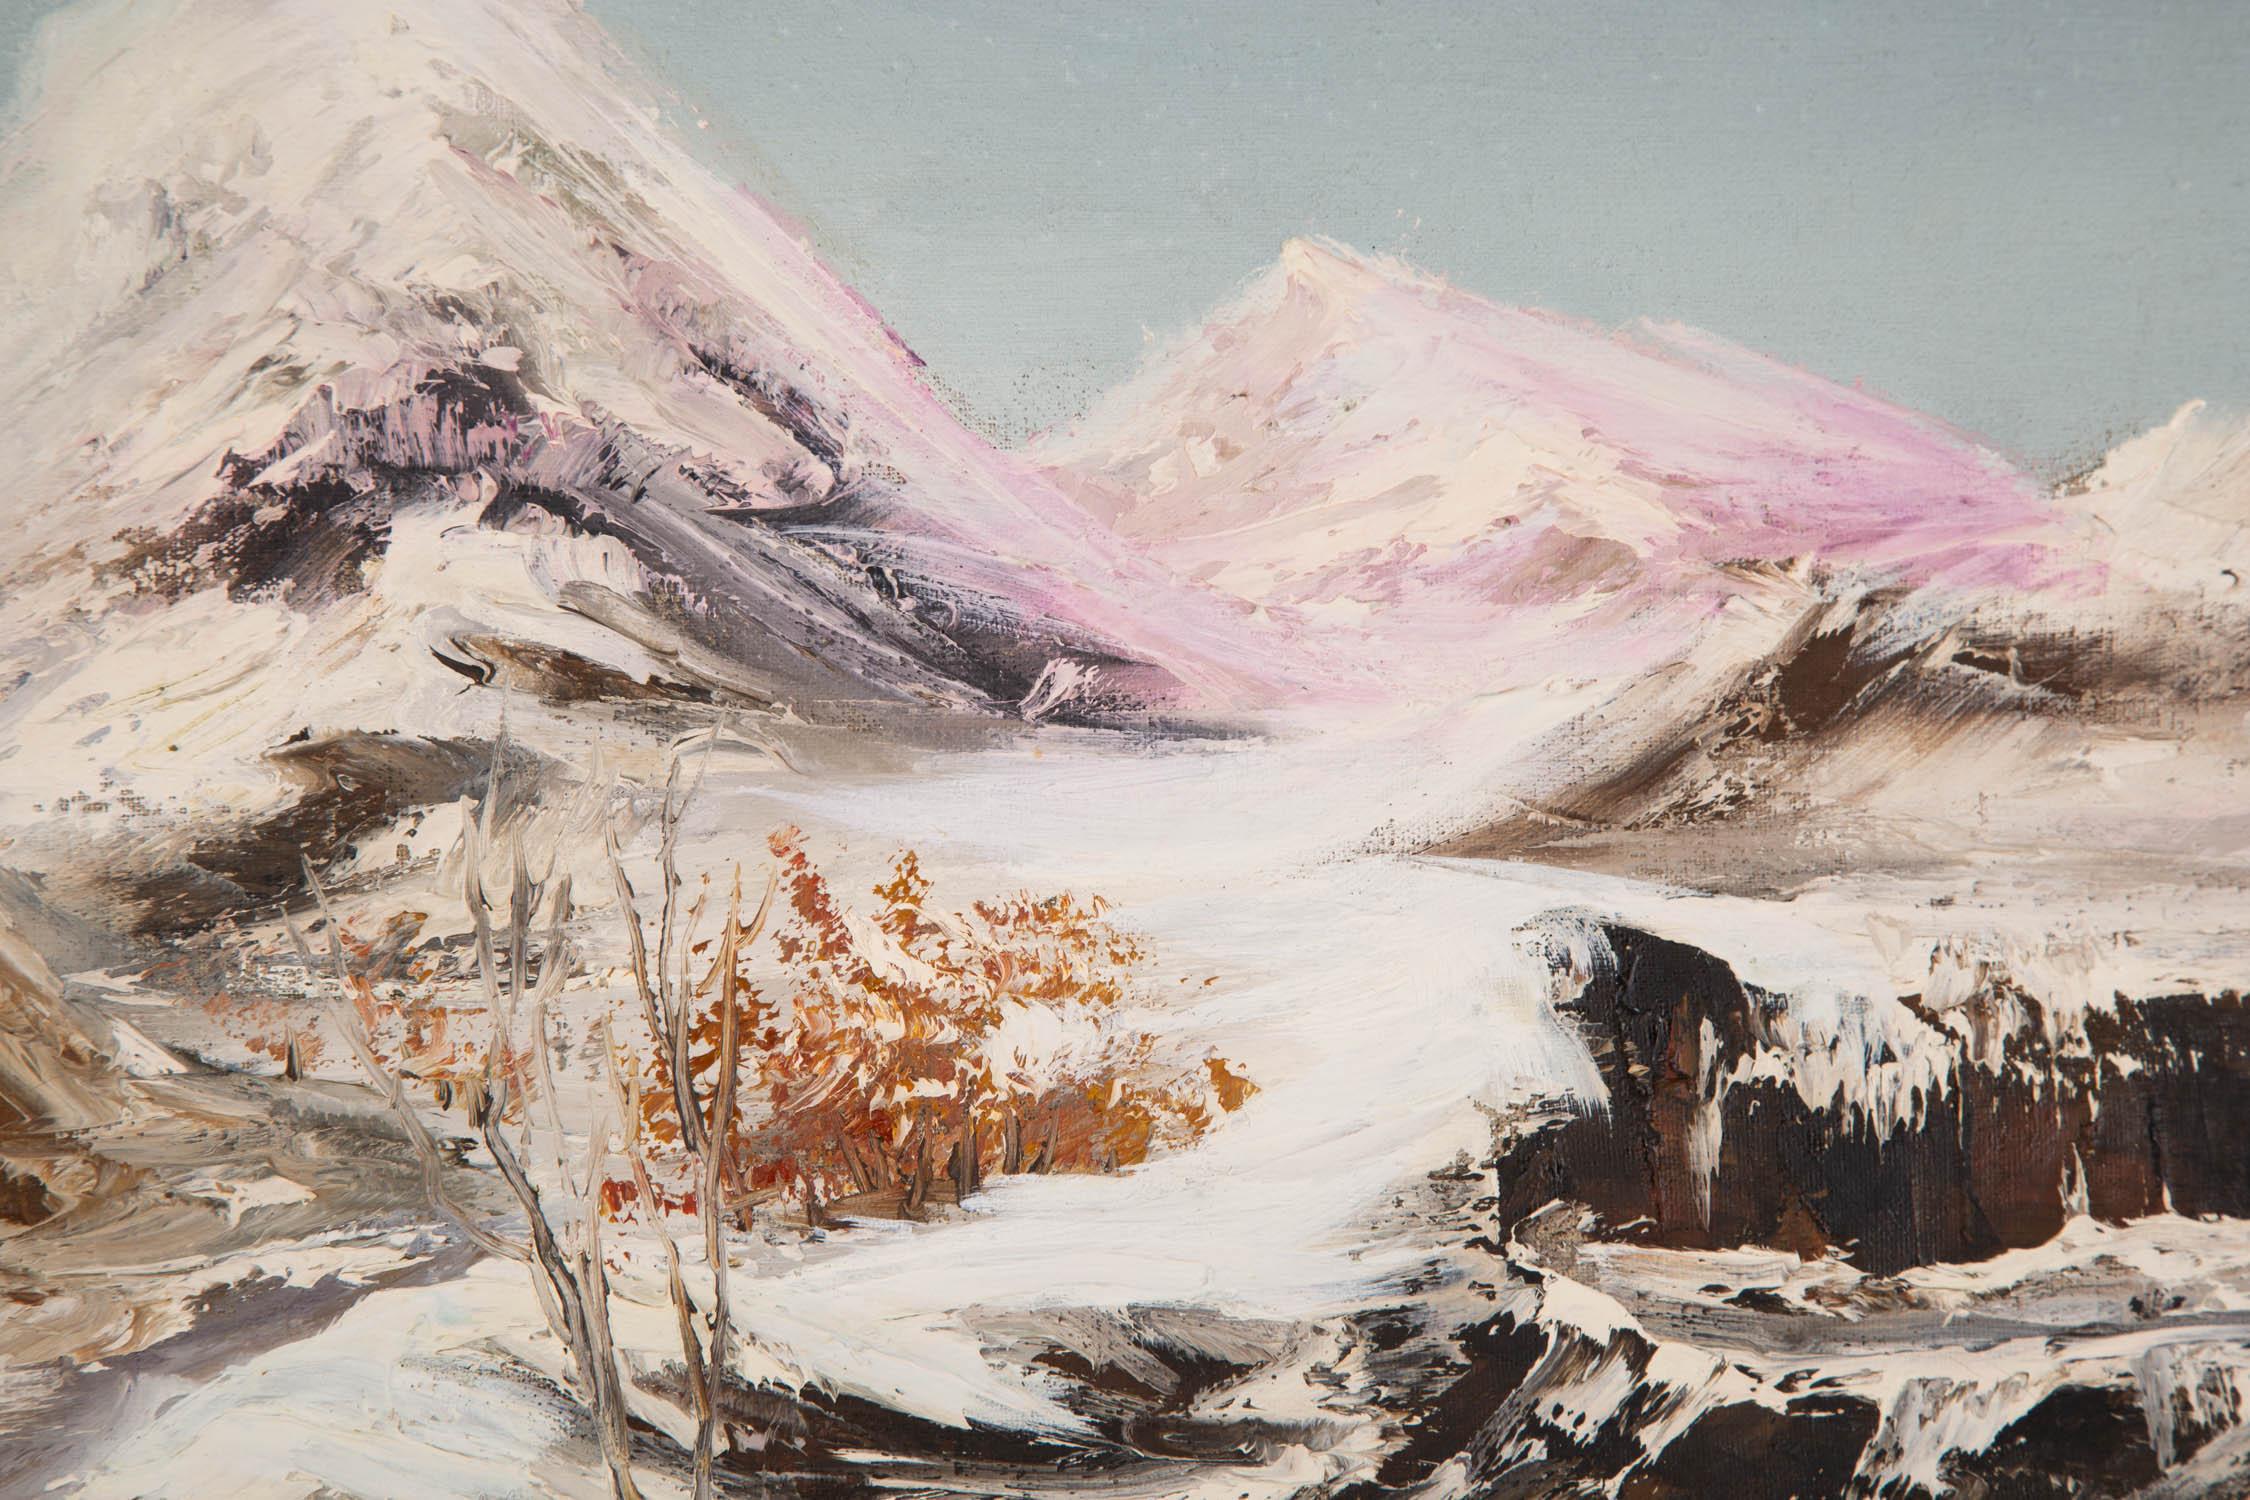  Title: Snow Mountain
 Medium: Oil on canvas
 Size: 22 x 30 inches
 Frame: Framing options available!
 Condition: The painting appears to be in excellent condition.
 
 Year: 2000 Circa
 Artist: JianPing Chen
 Signature: Signed
 Signature Location: